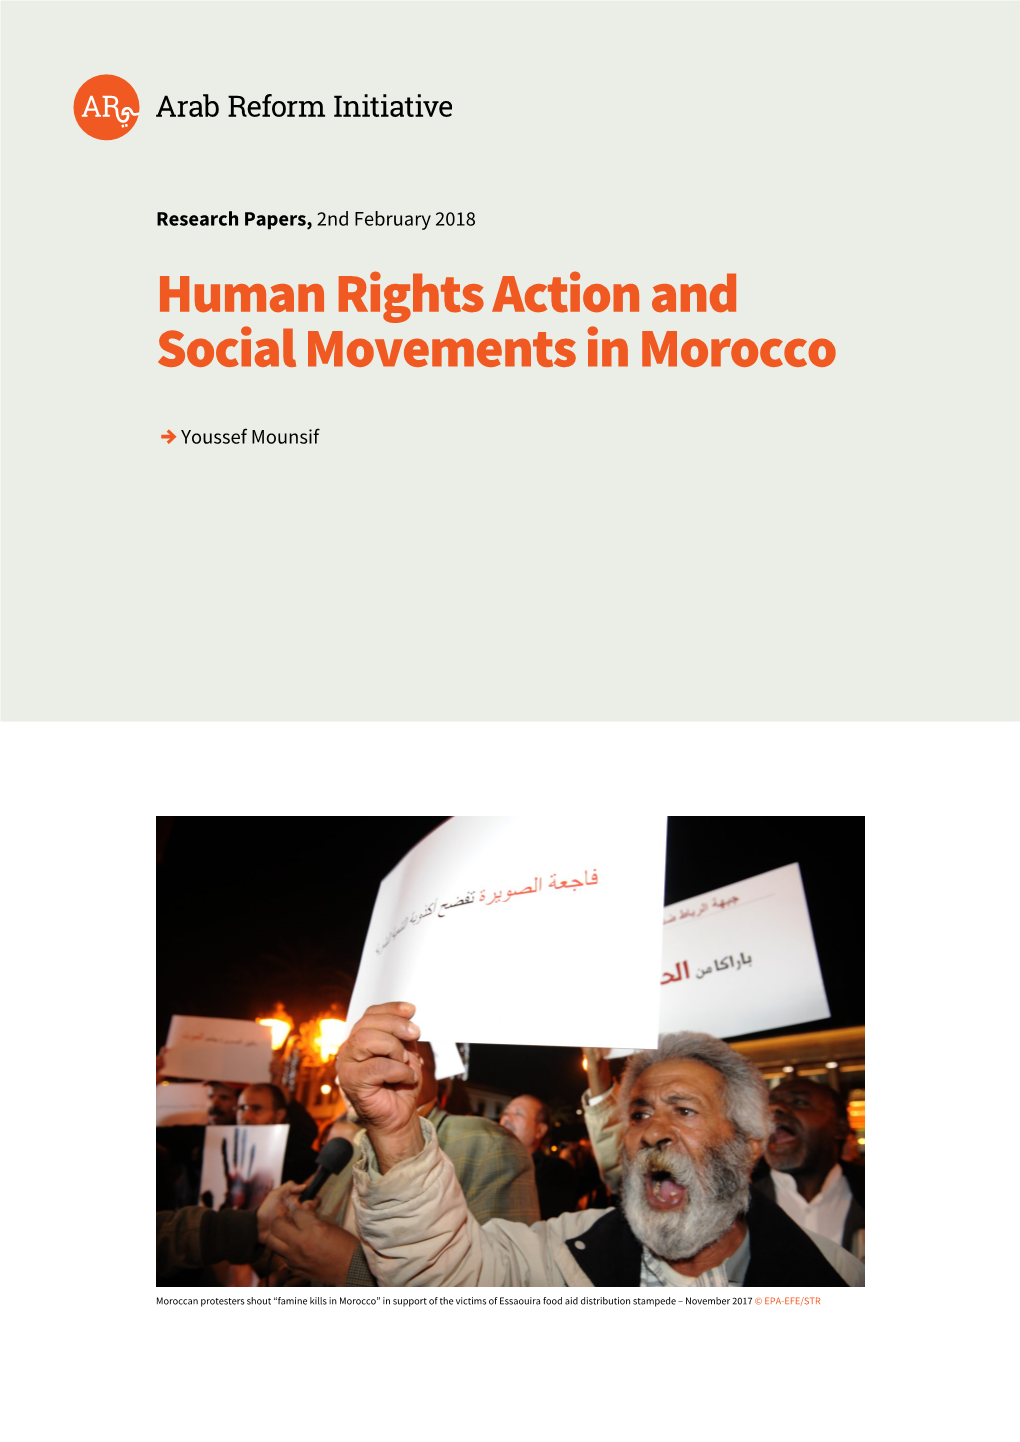 Human Rights Action and Social Movements in Morocco